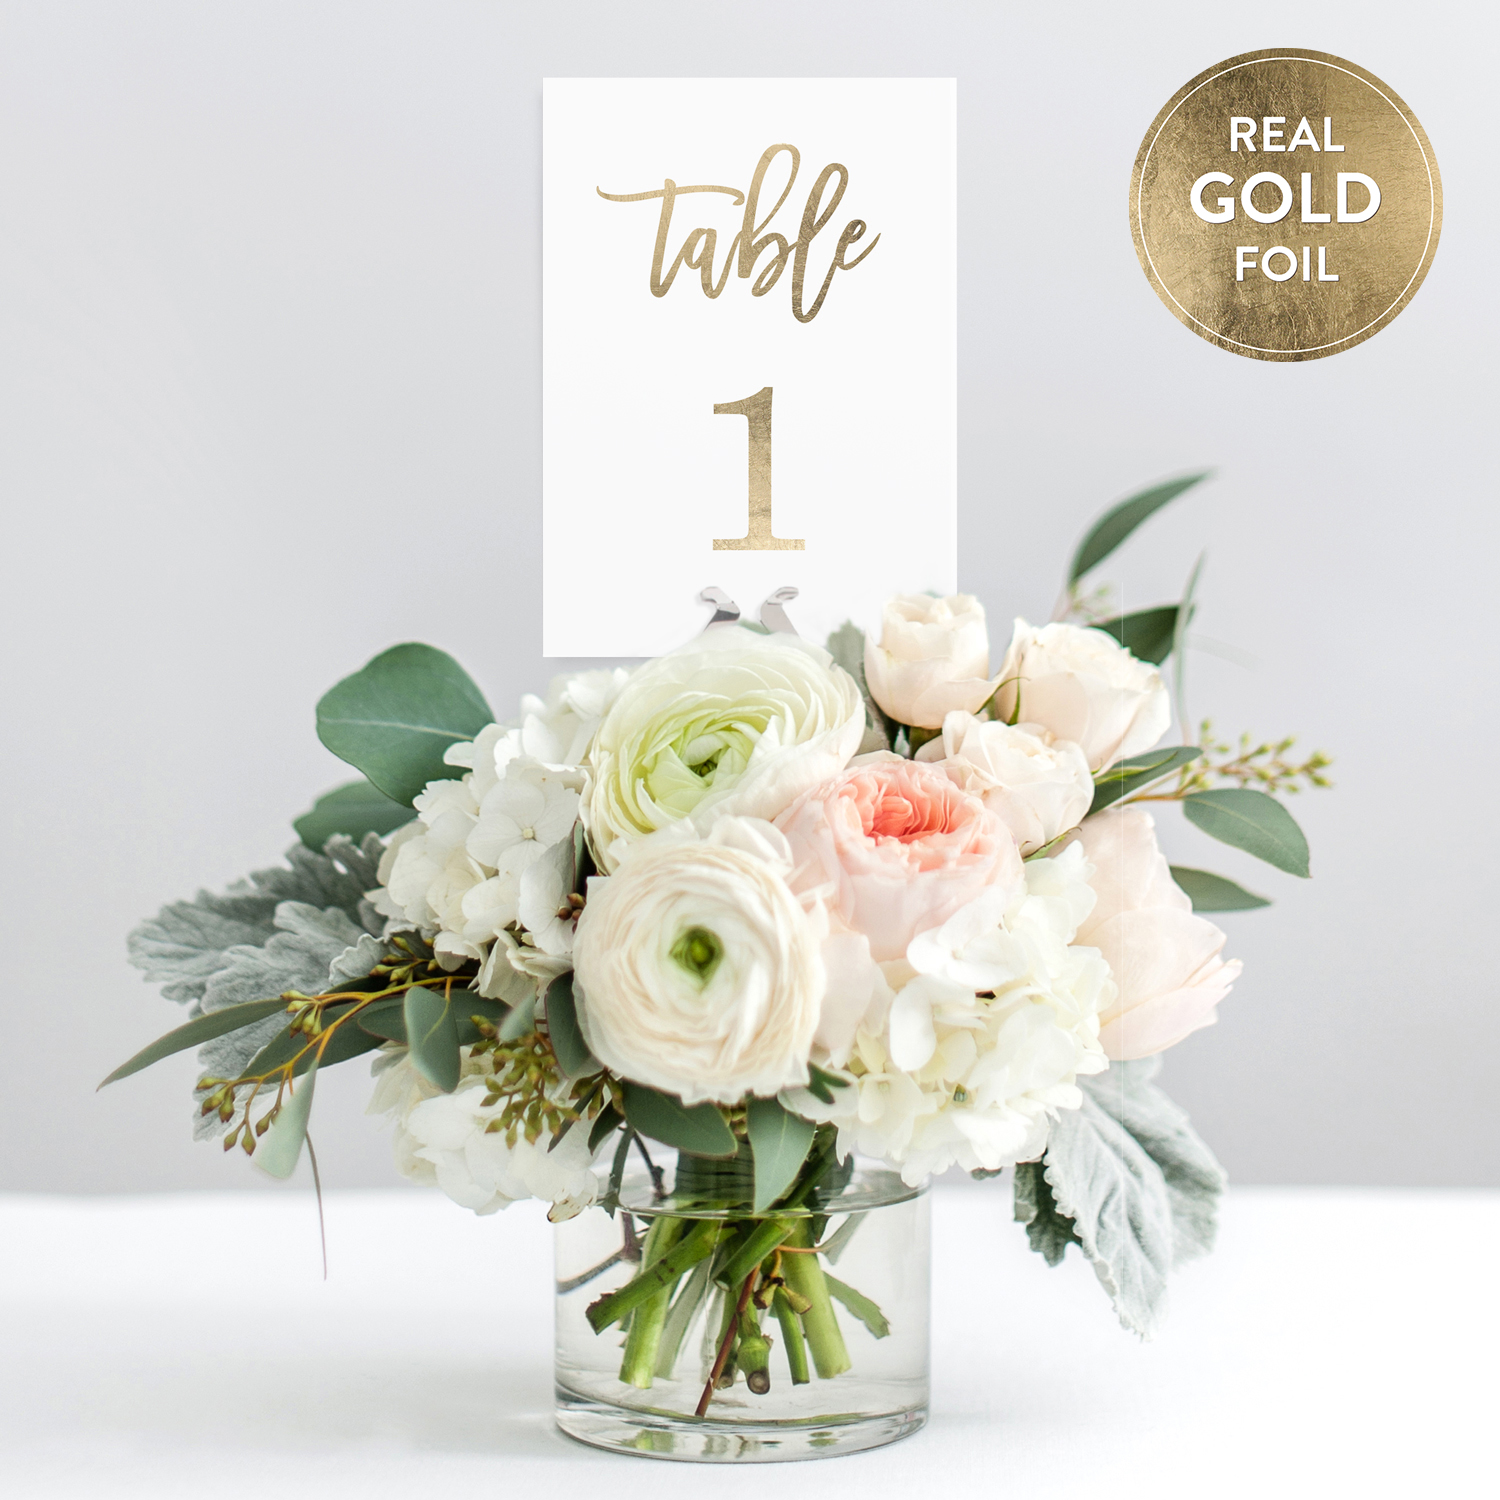 Chemin de Table Coton Lin Just Married Rose Gold